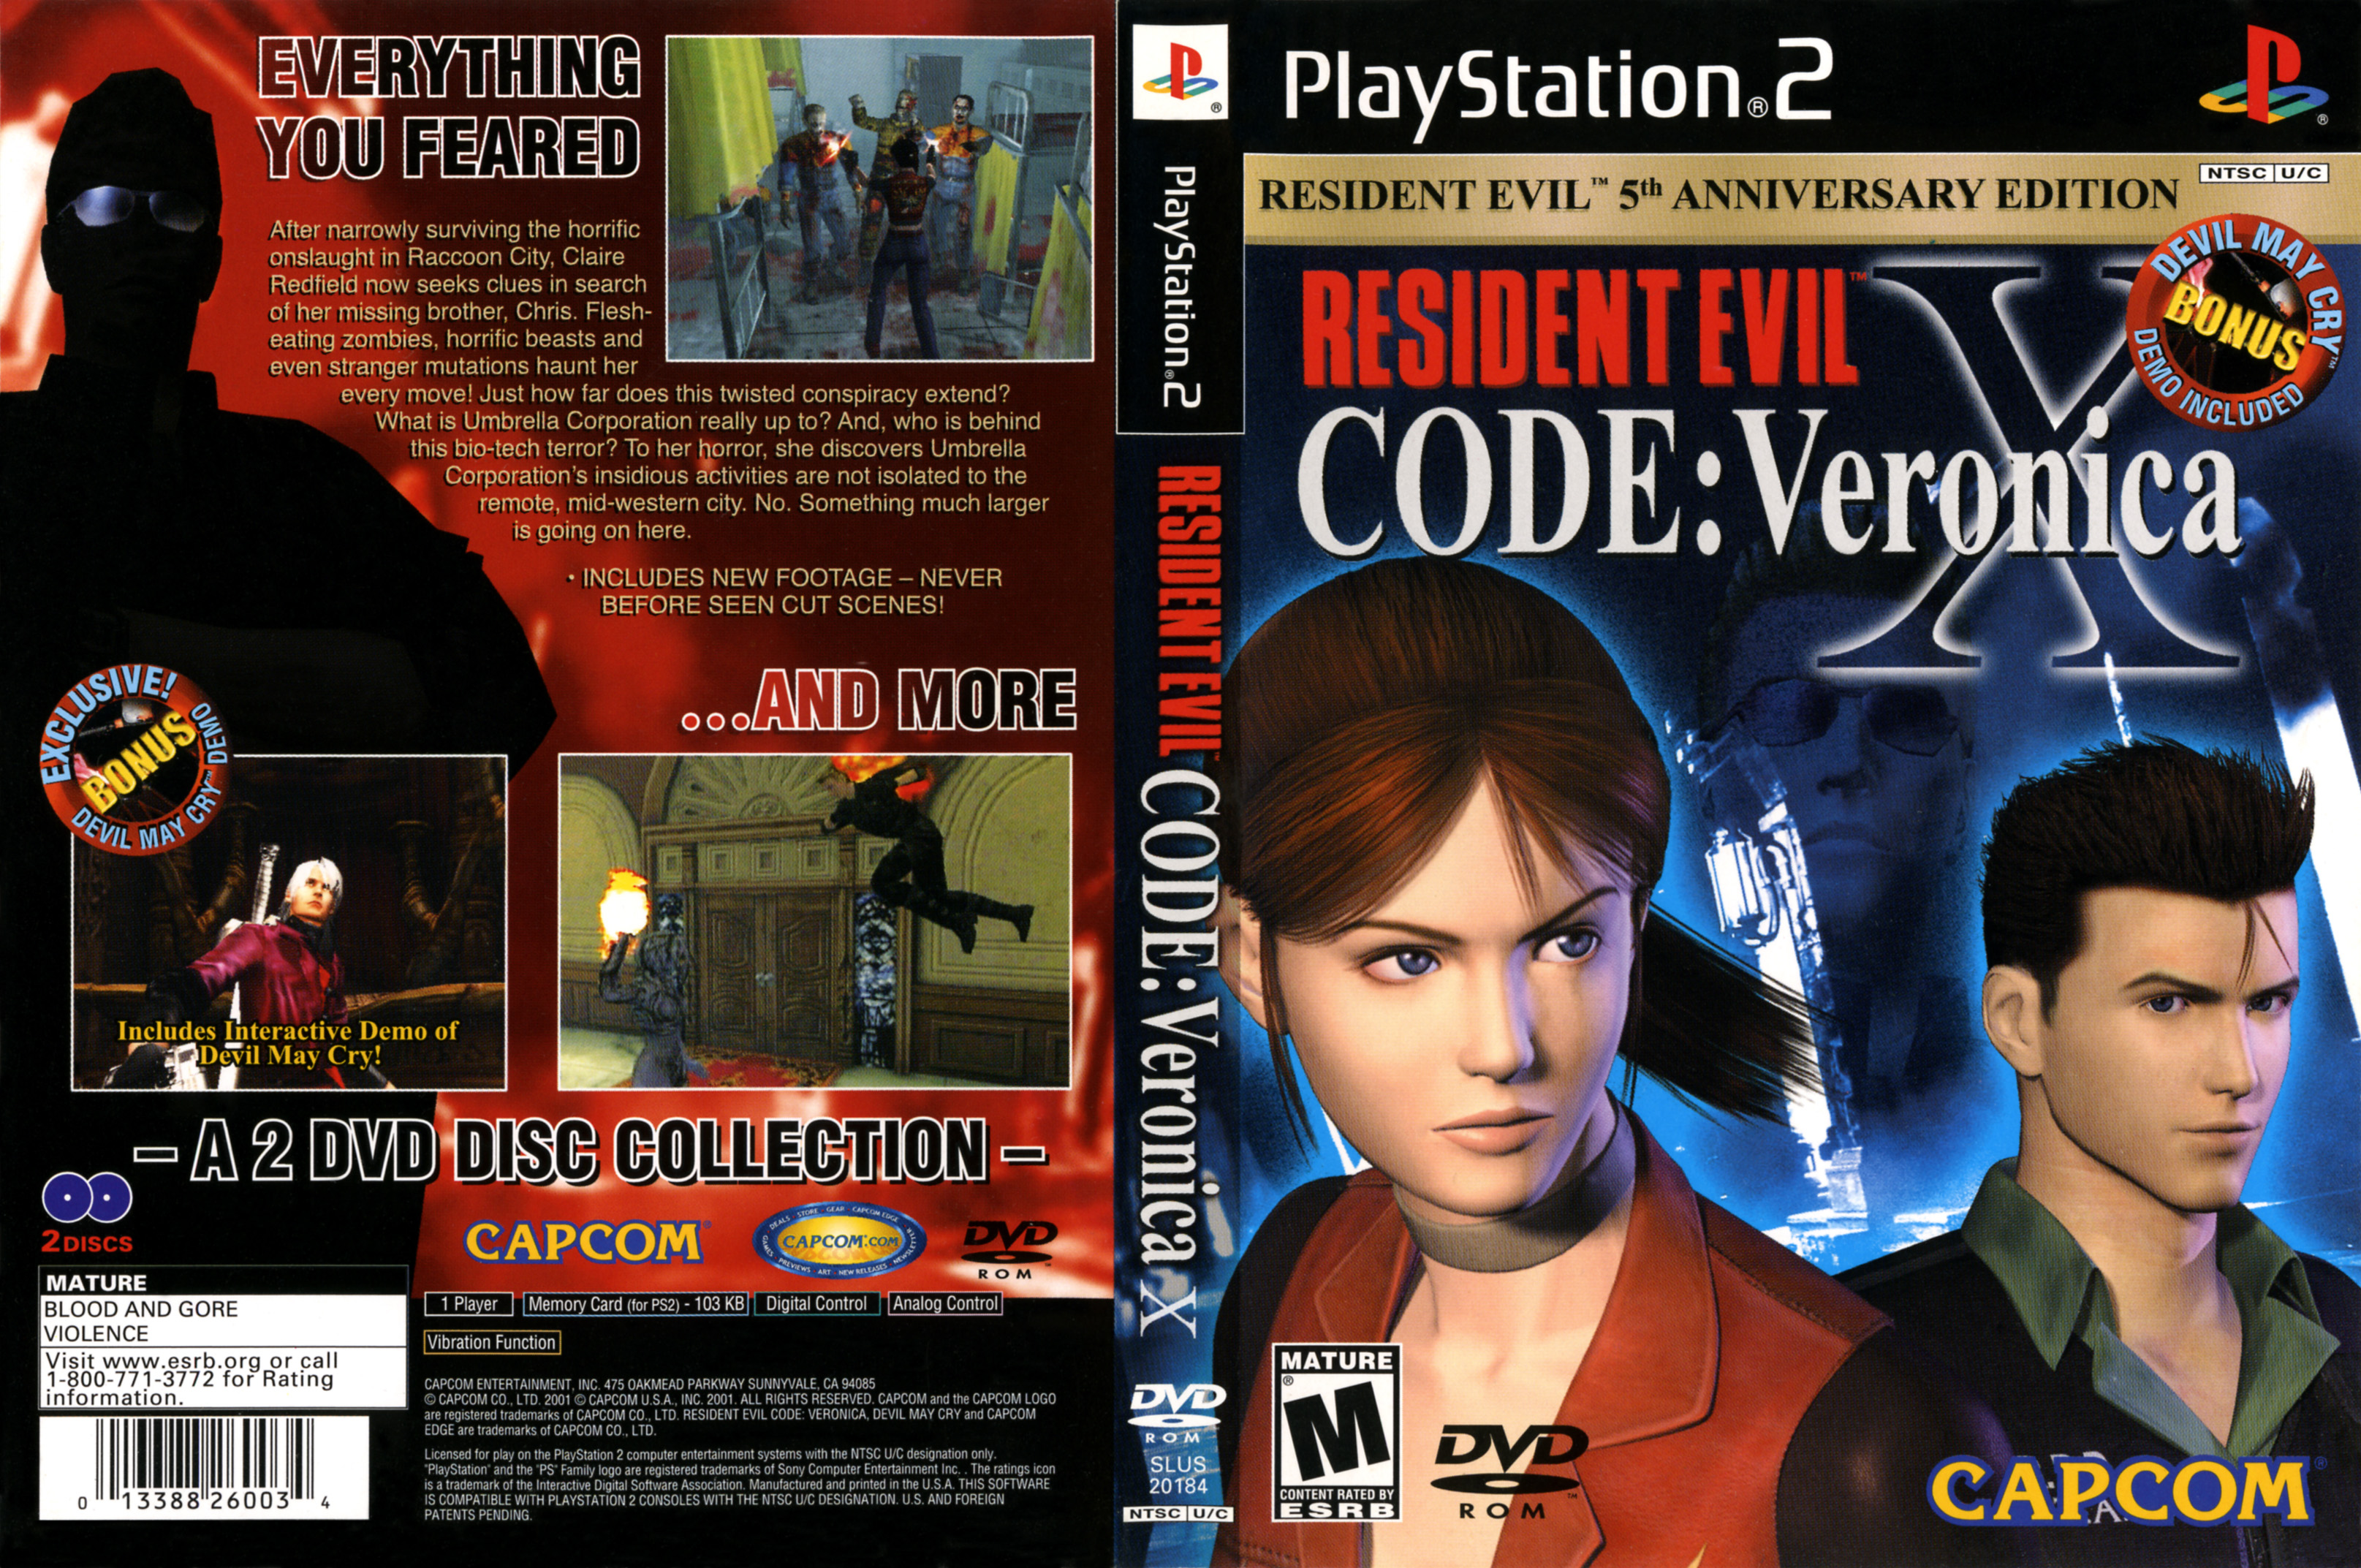 Resident Evil fans have spoken, and they want a Code Veronica